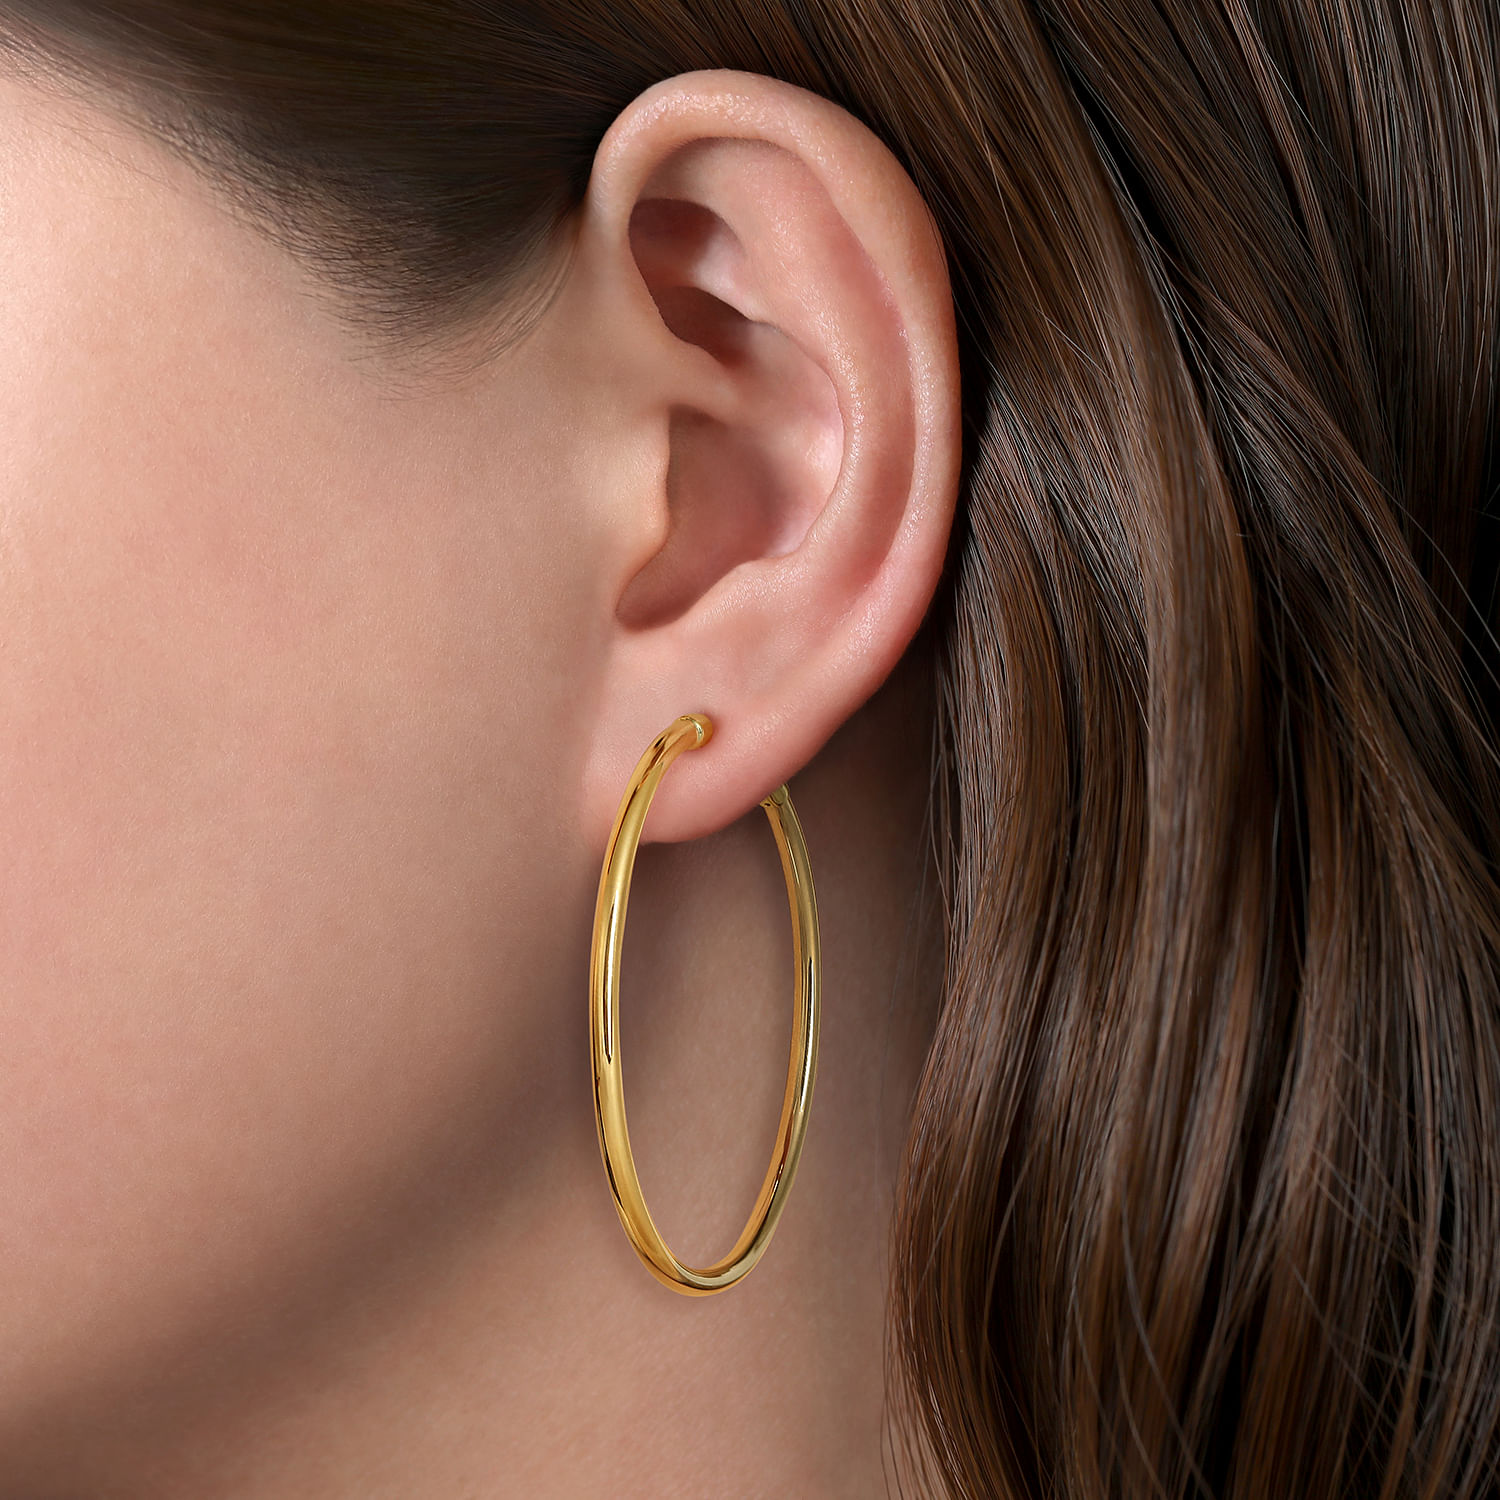 14K Yellow Gold 50mm Round Classic Hoop Earrings